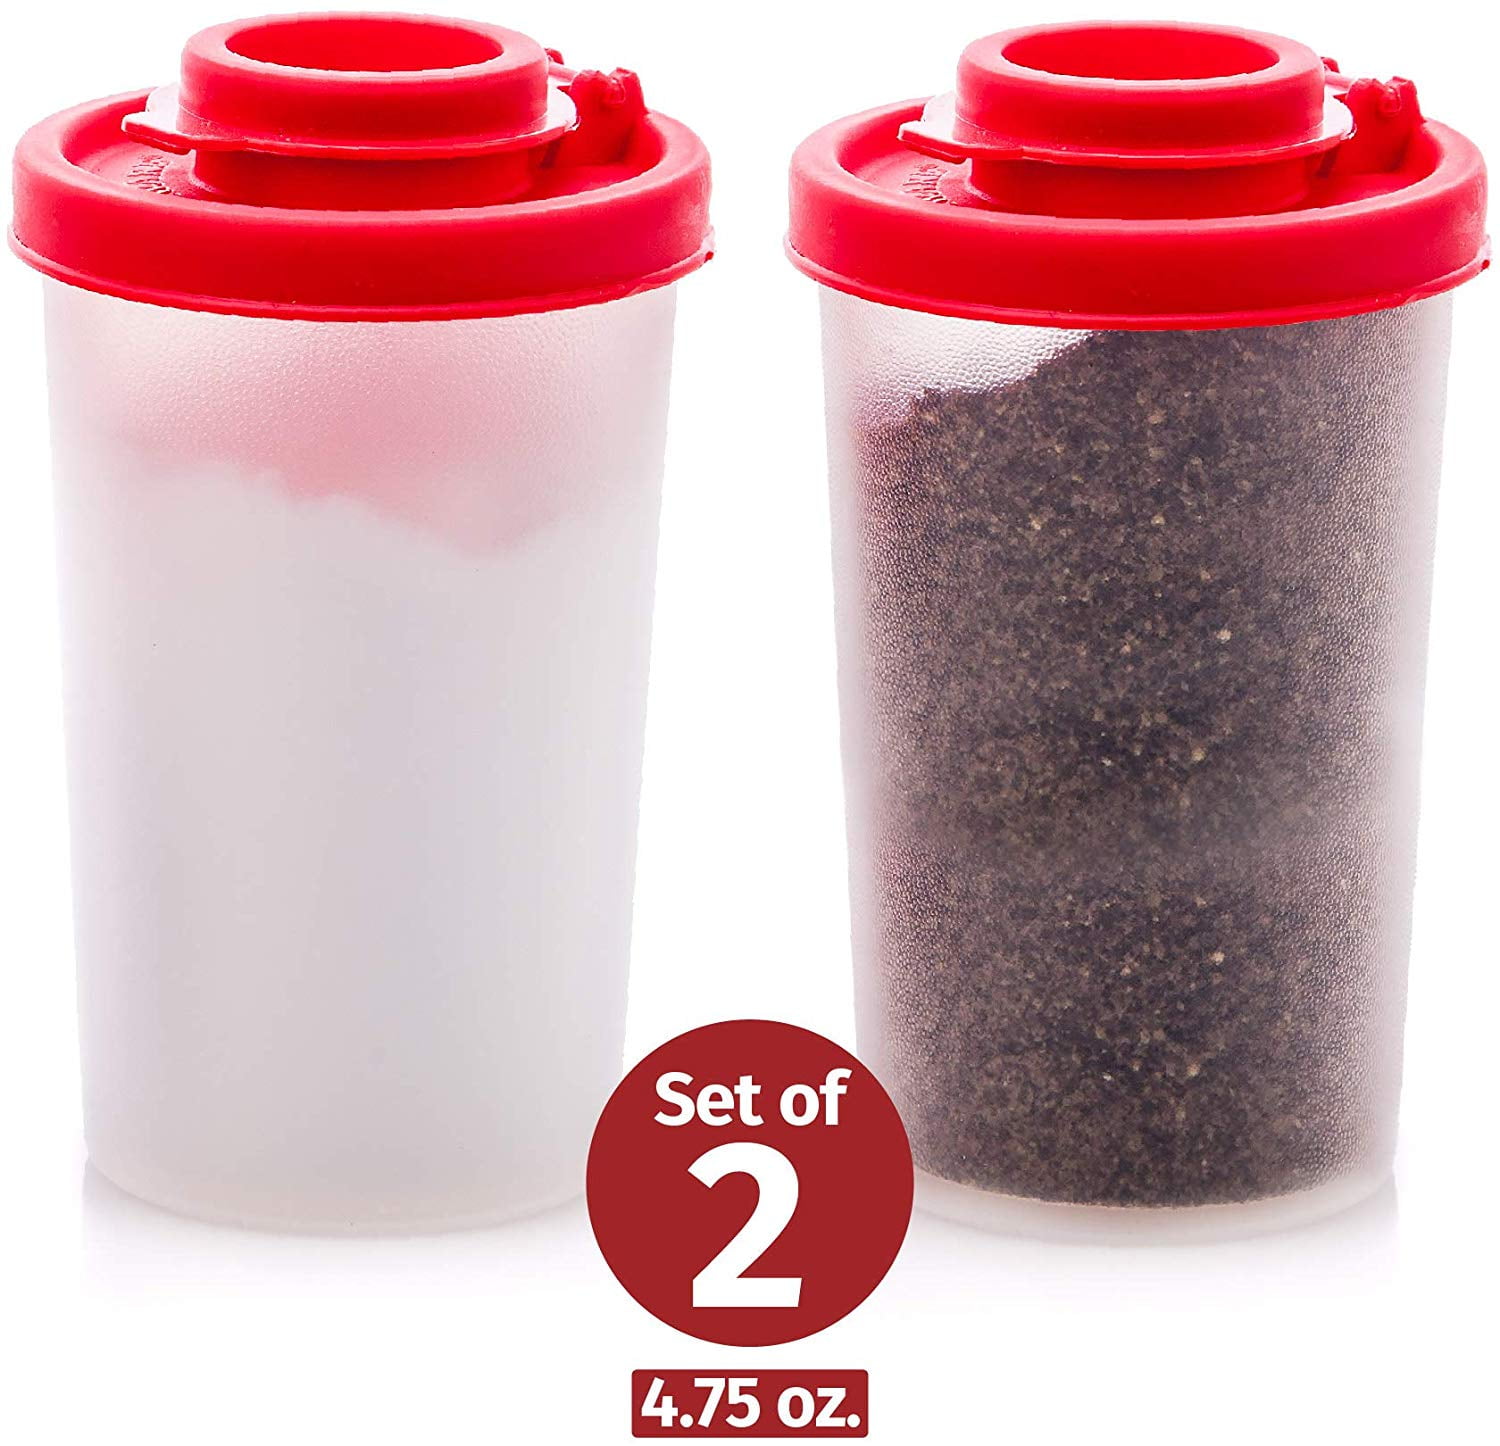 Signoraware Plastic Spice Containers with 2-Way Lids Sift or Pour Shaker, 8 Pk. 4 Mini 4 Big